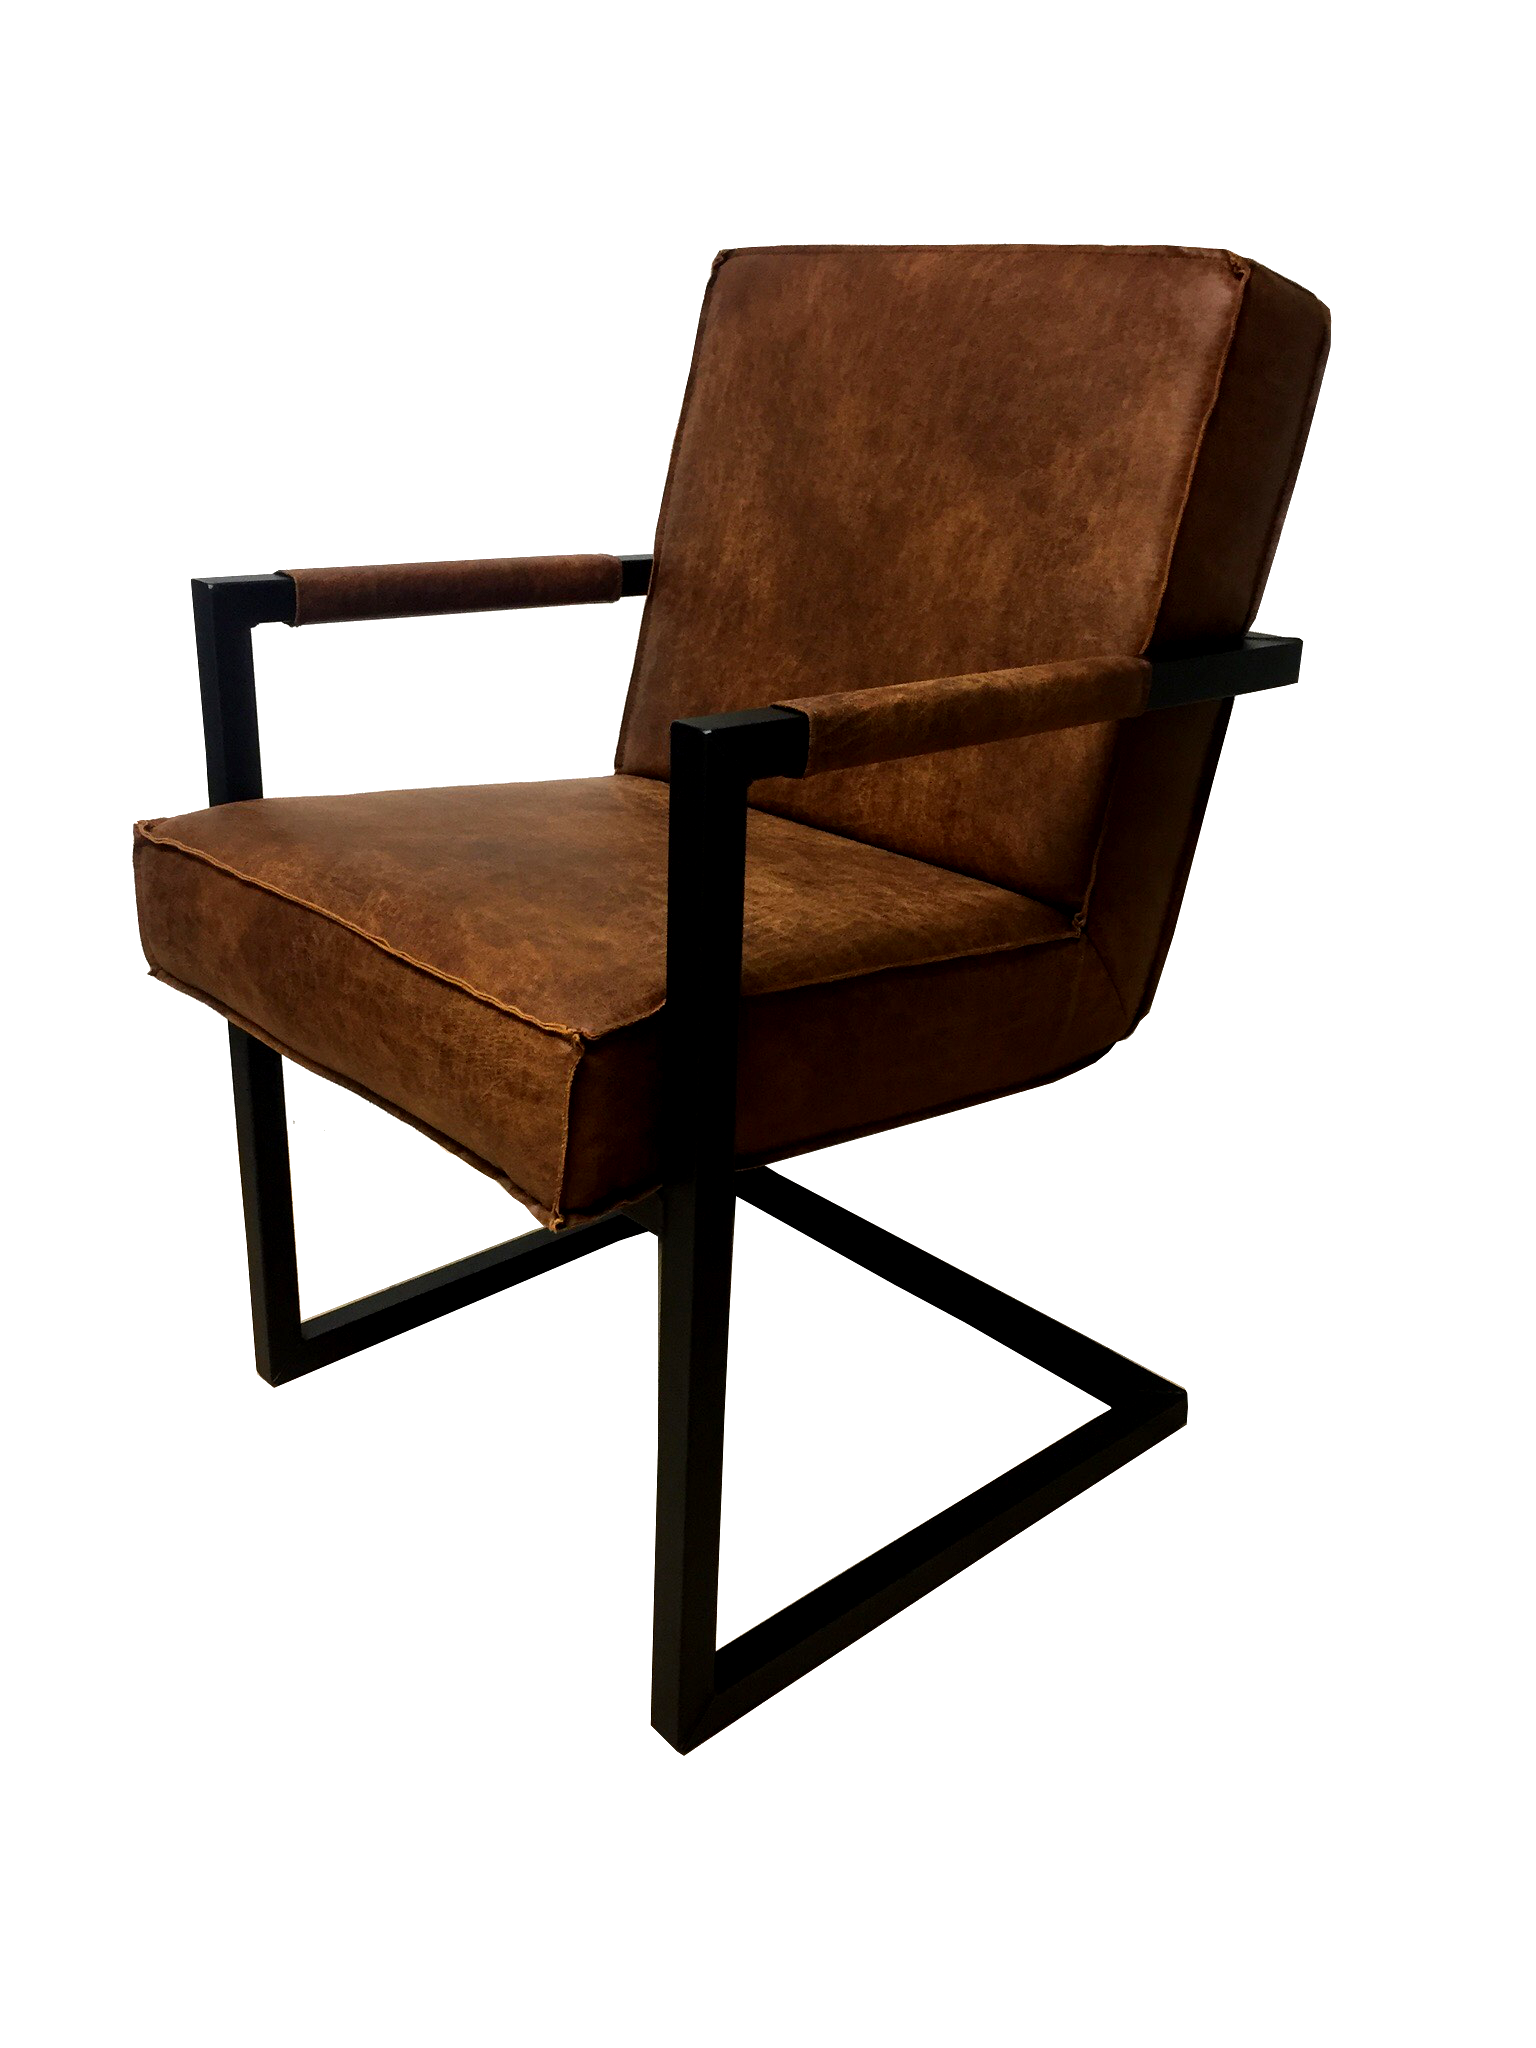 LISA chair, leather upholstery